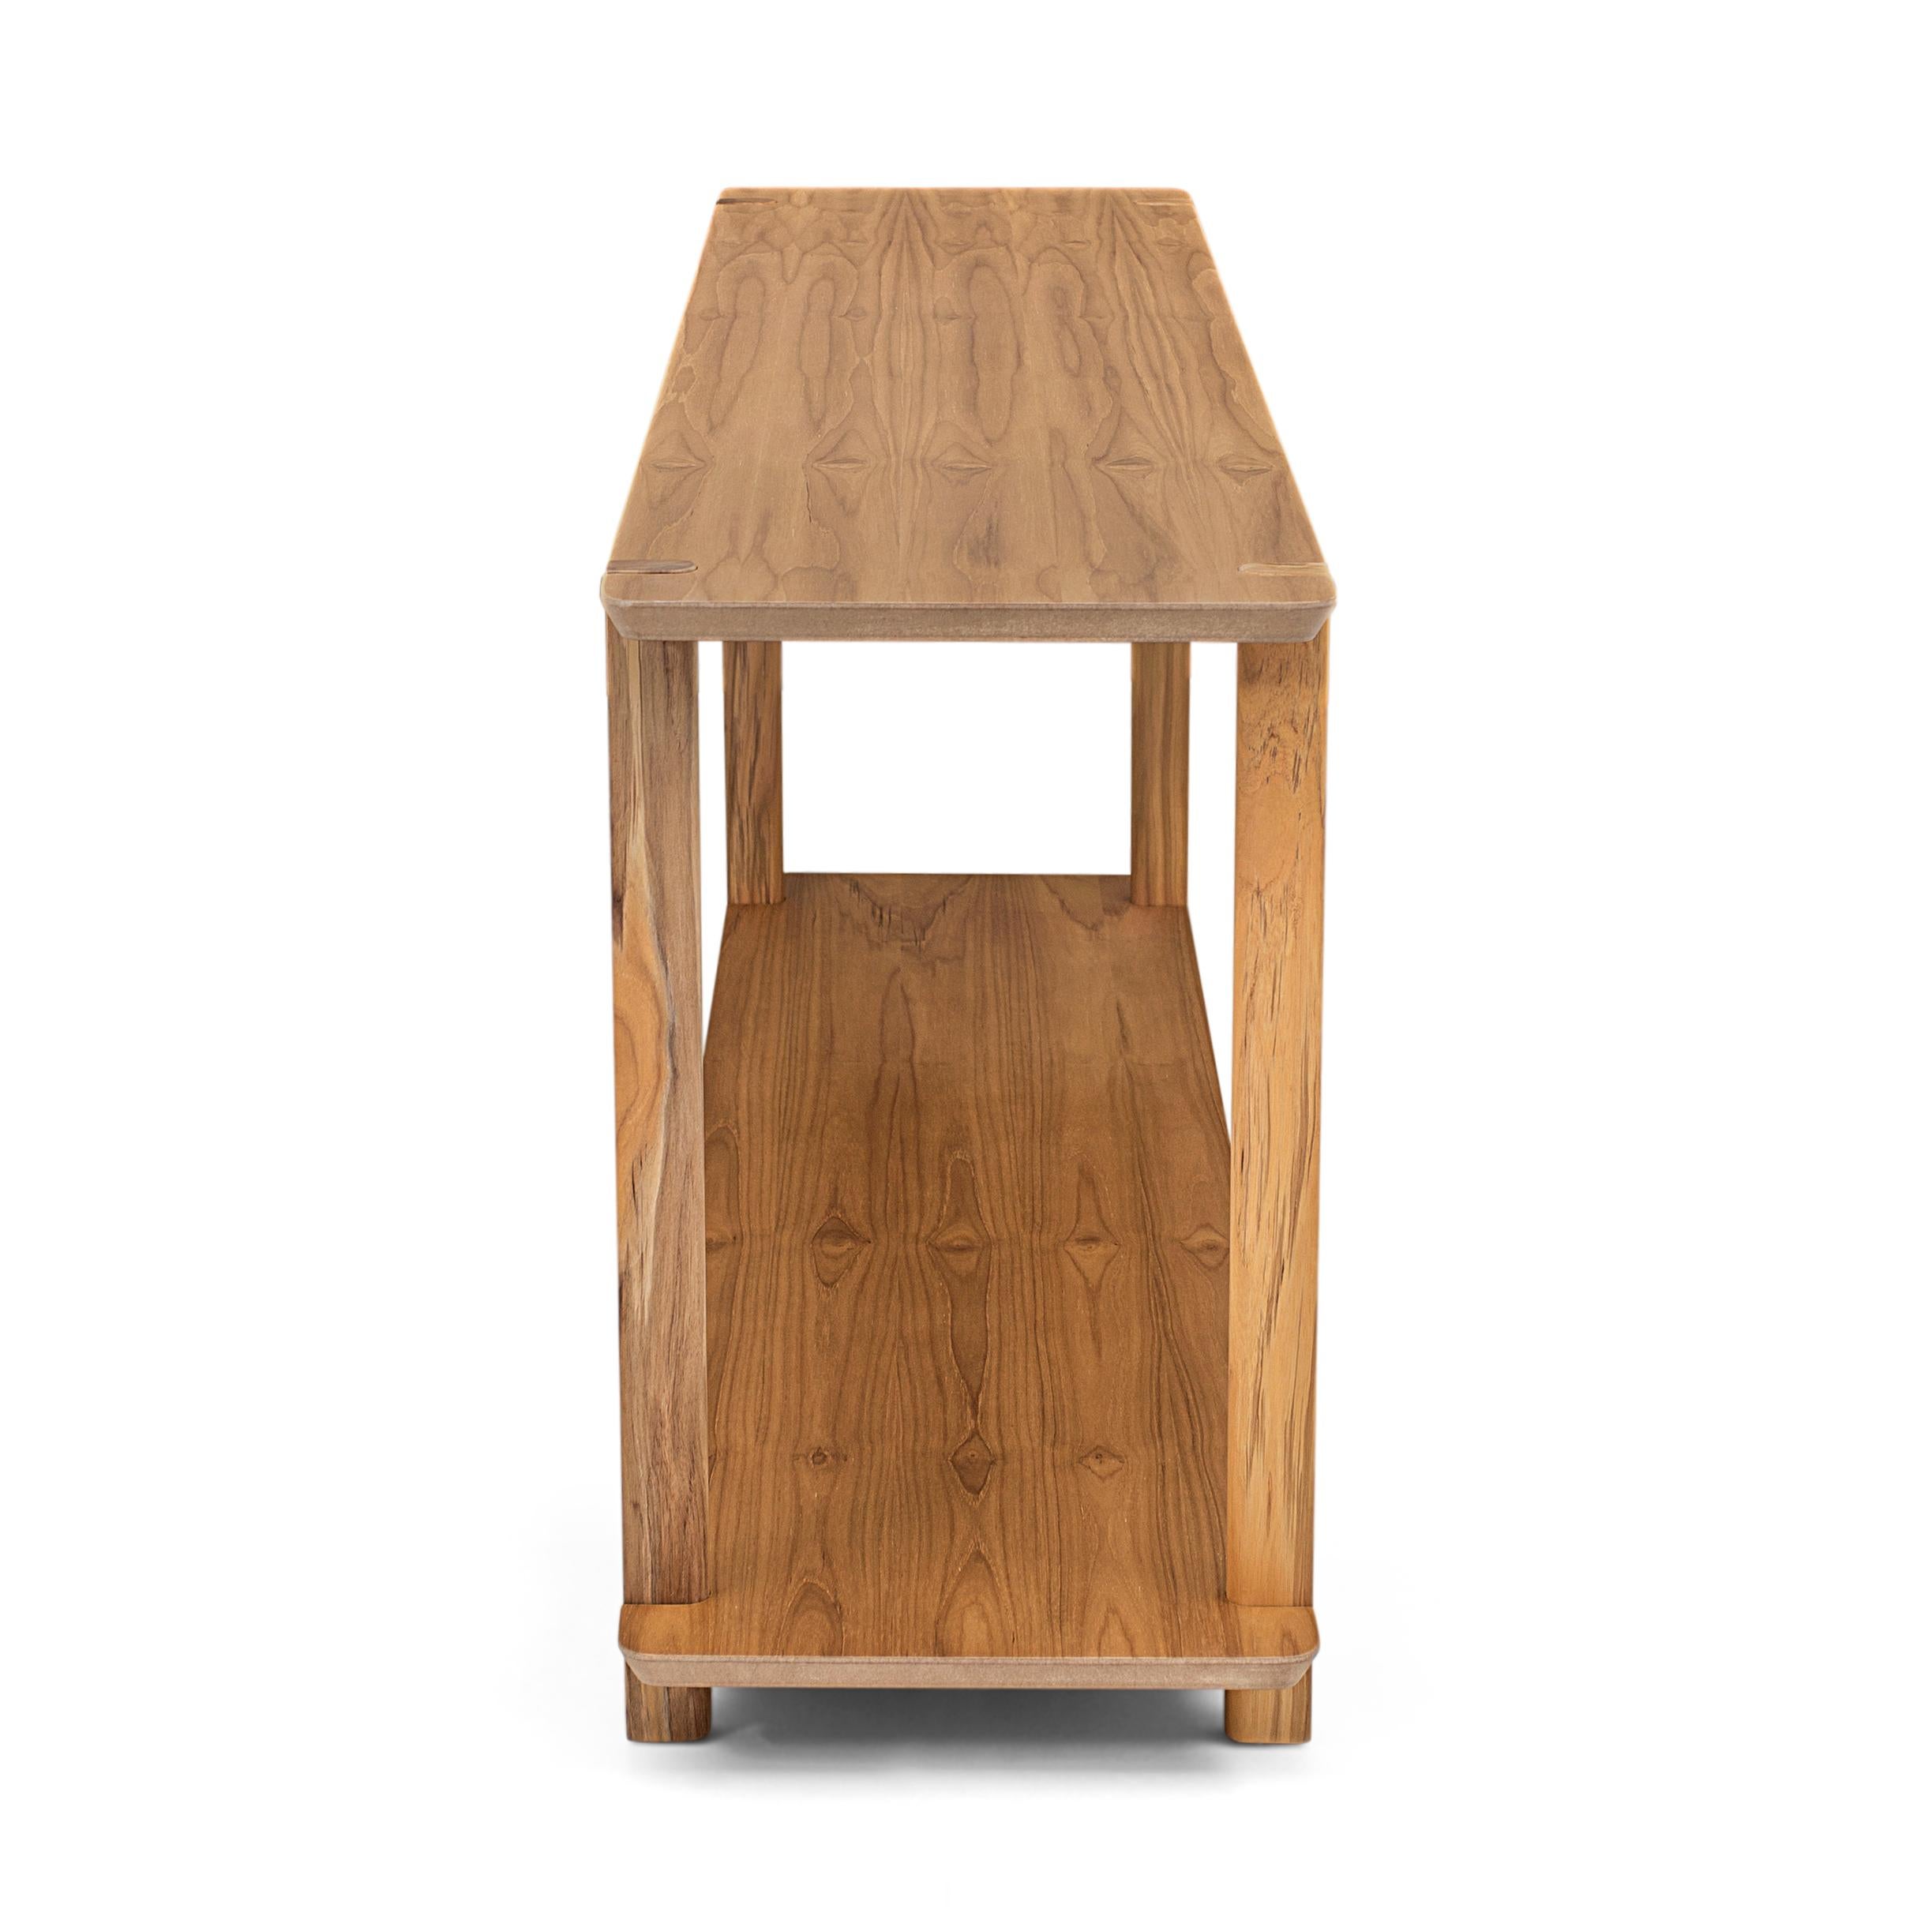 The Clan console is yet another Uultis case piece that combines style and functionality with its teak solid wood finish and laminated MDF-frame top. This console can be used in a variety of rooms in your home, including the bedroom, living room, or